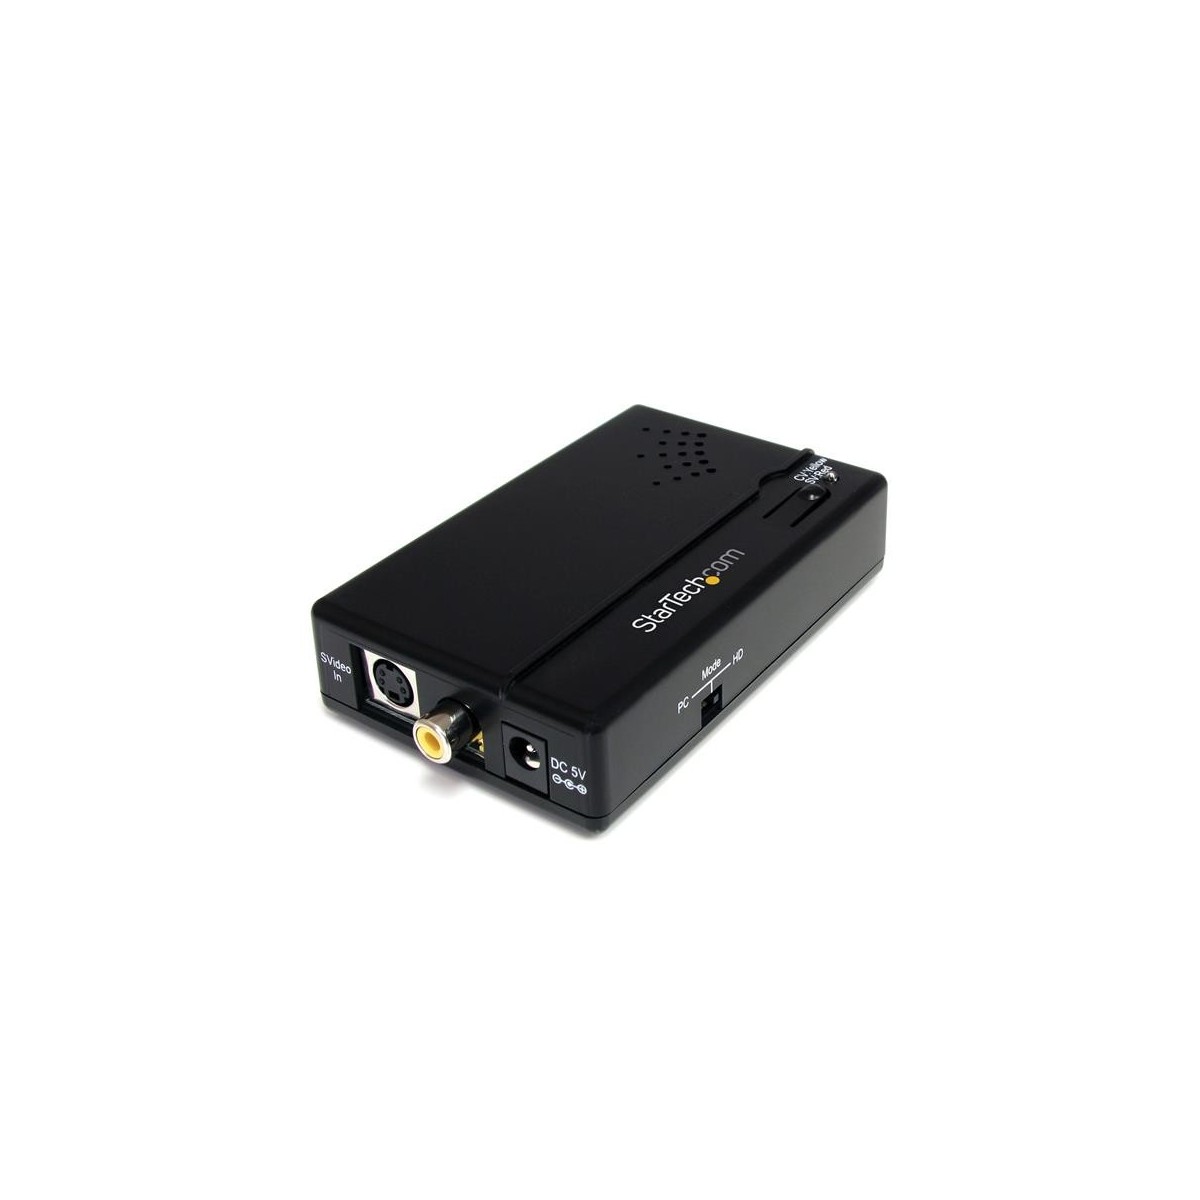 StarTech.com Composite and S-Video to HDMI Converter with Audio - 1600 x 1200 pixels - 1024 x 768,1280 x 1024,1600 x 1200 - NTSC